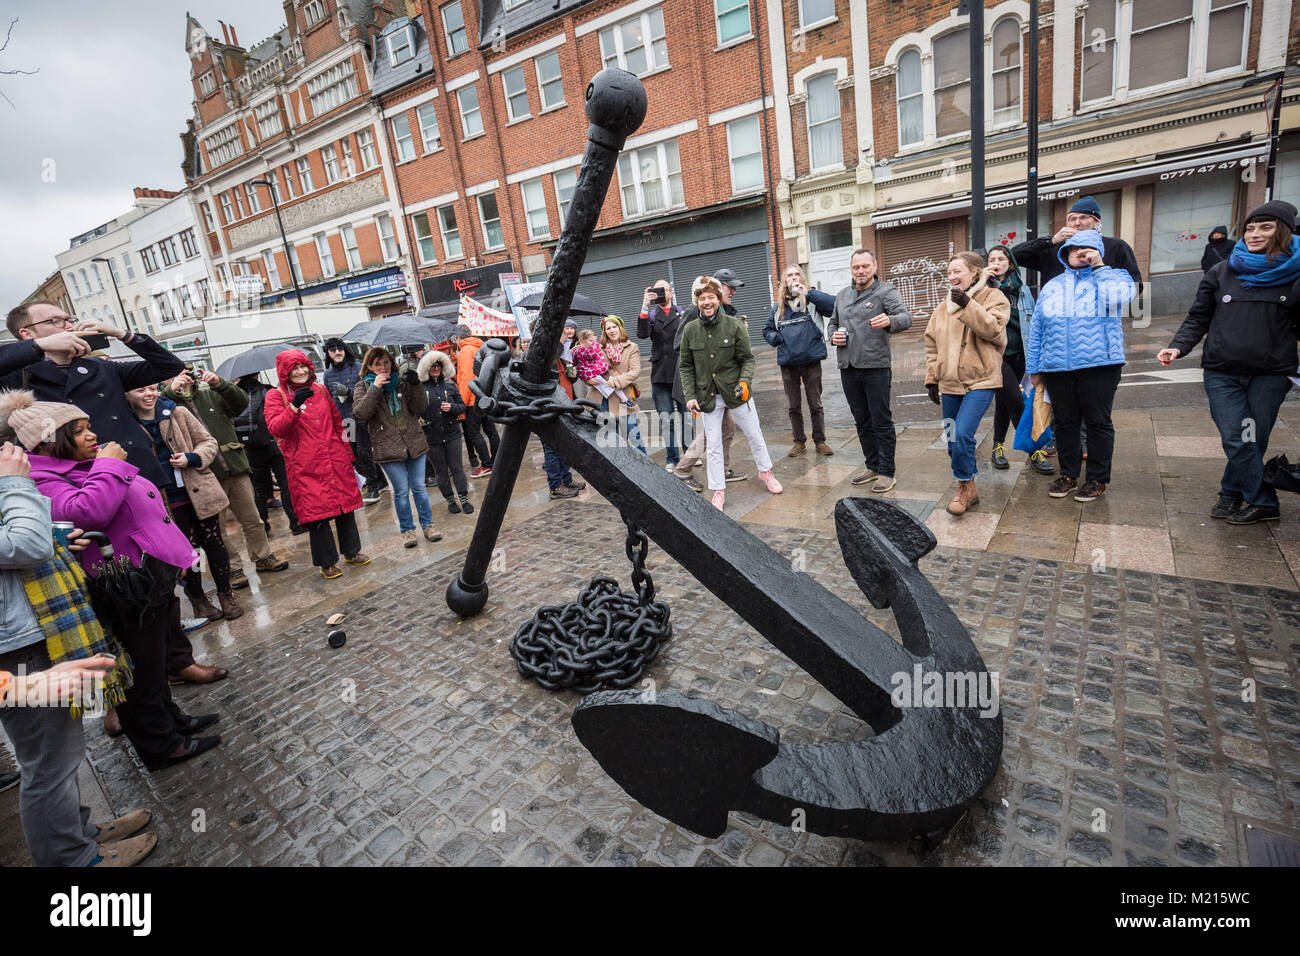 London, UK. 3rd Feb, 2018. Local residents celebrate the return of the iconic Deptford Anchor with a celebratory musical procession as the anchor is finally returned to its original place at the south end of Deptford High Street after being removed in 2013 . Credit: Guy Corbishley/Alamy Live News Stock Photo